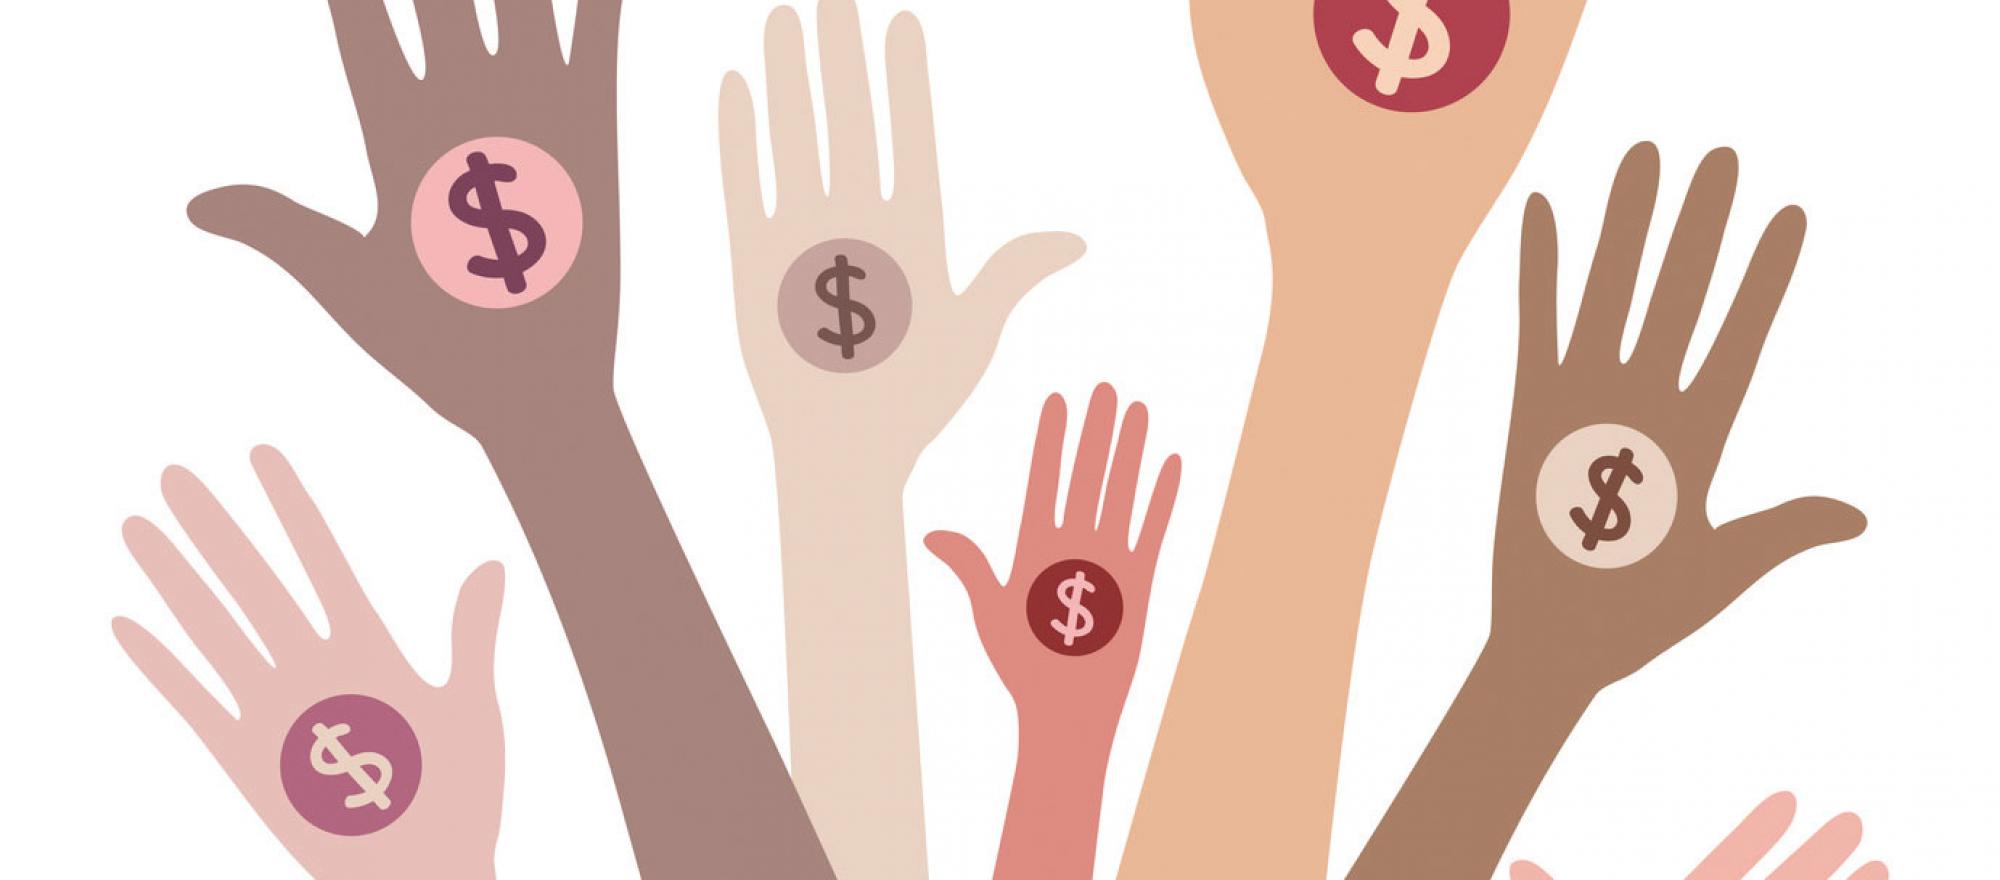 Any charity to which you donate should be happy to tell you what it’s trying to achieve, how this goal will be accomplished and what it has done so far. (Illustration: Fotolia)